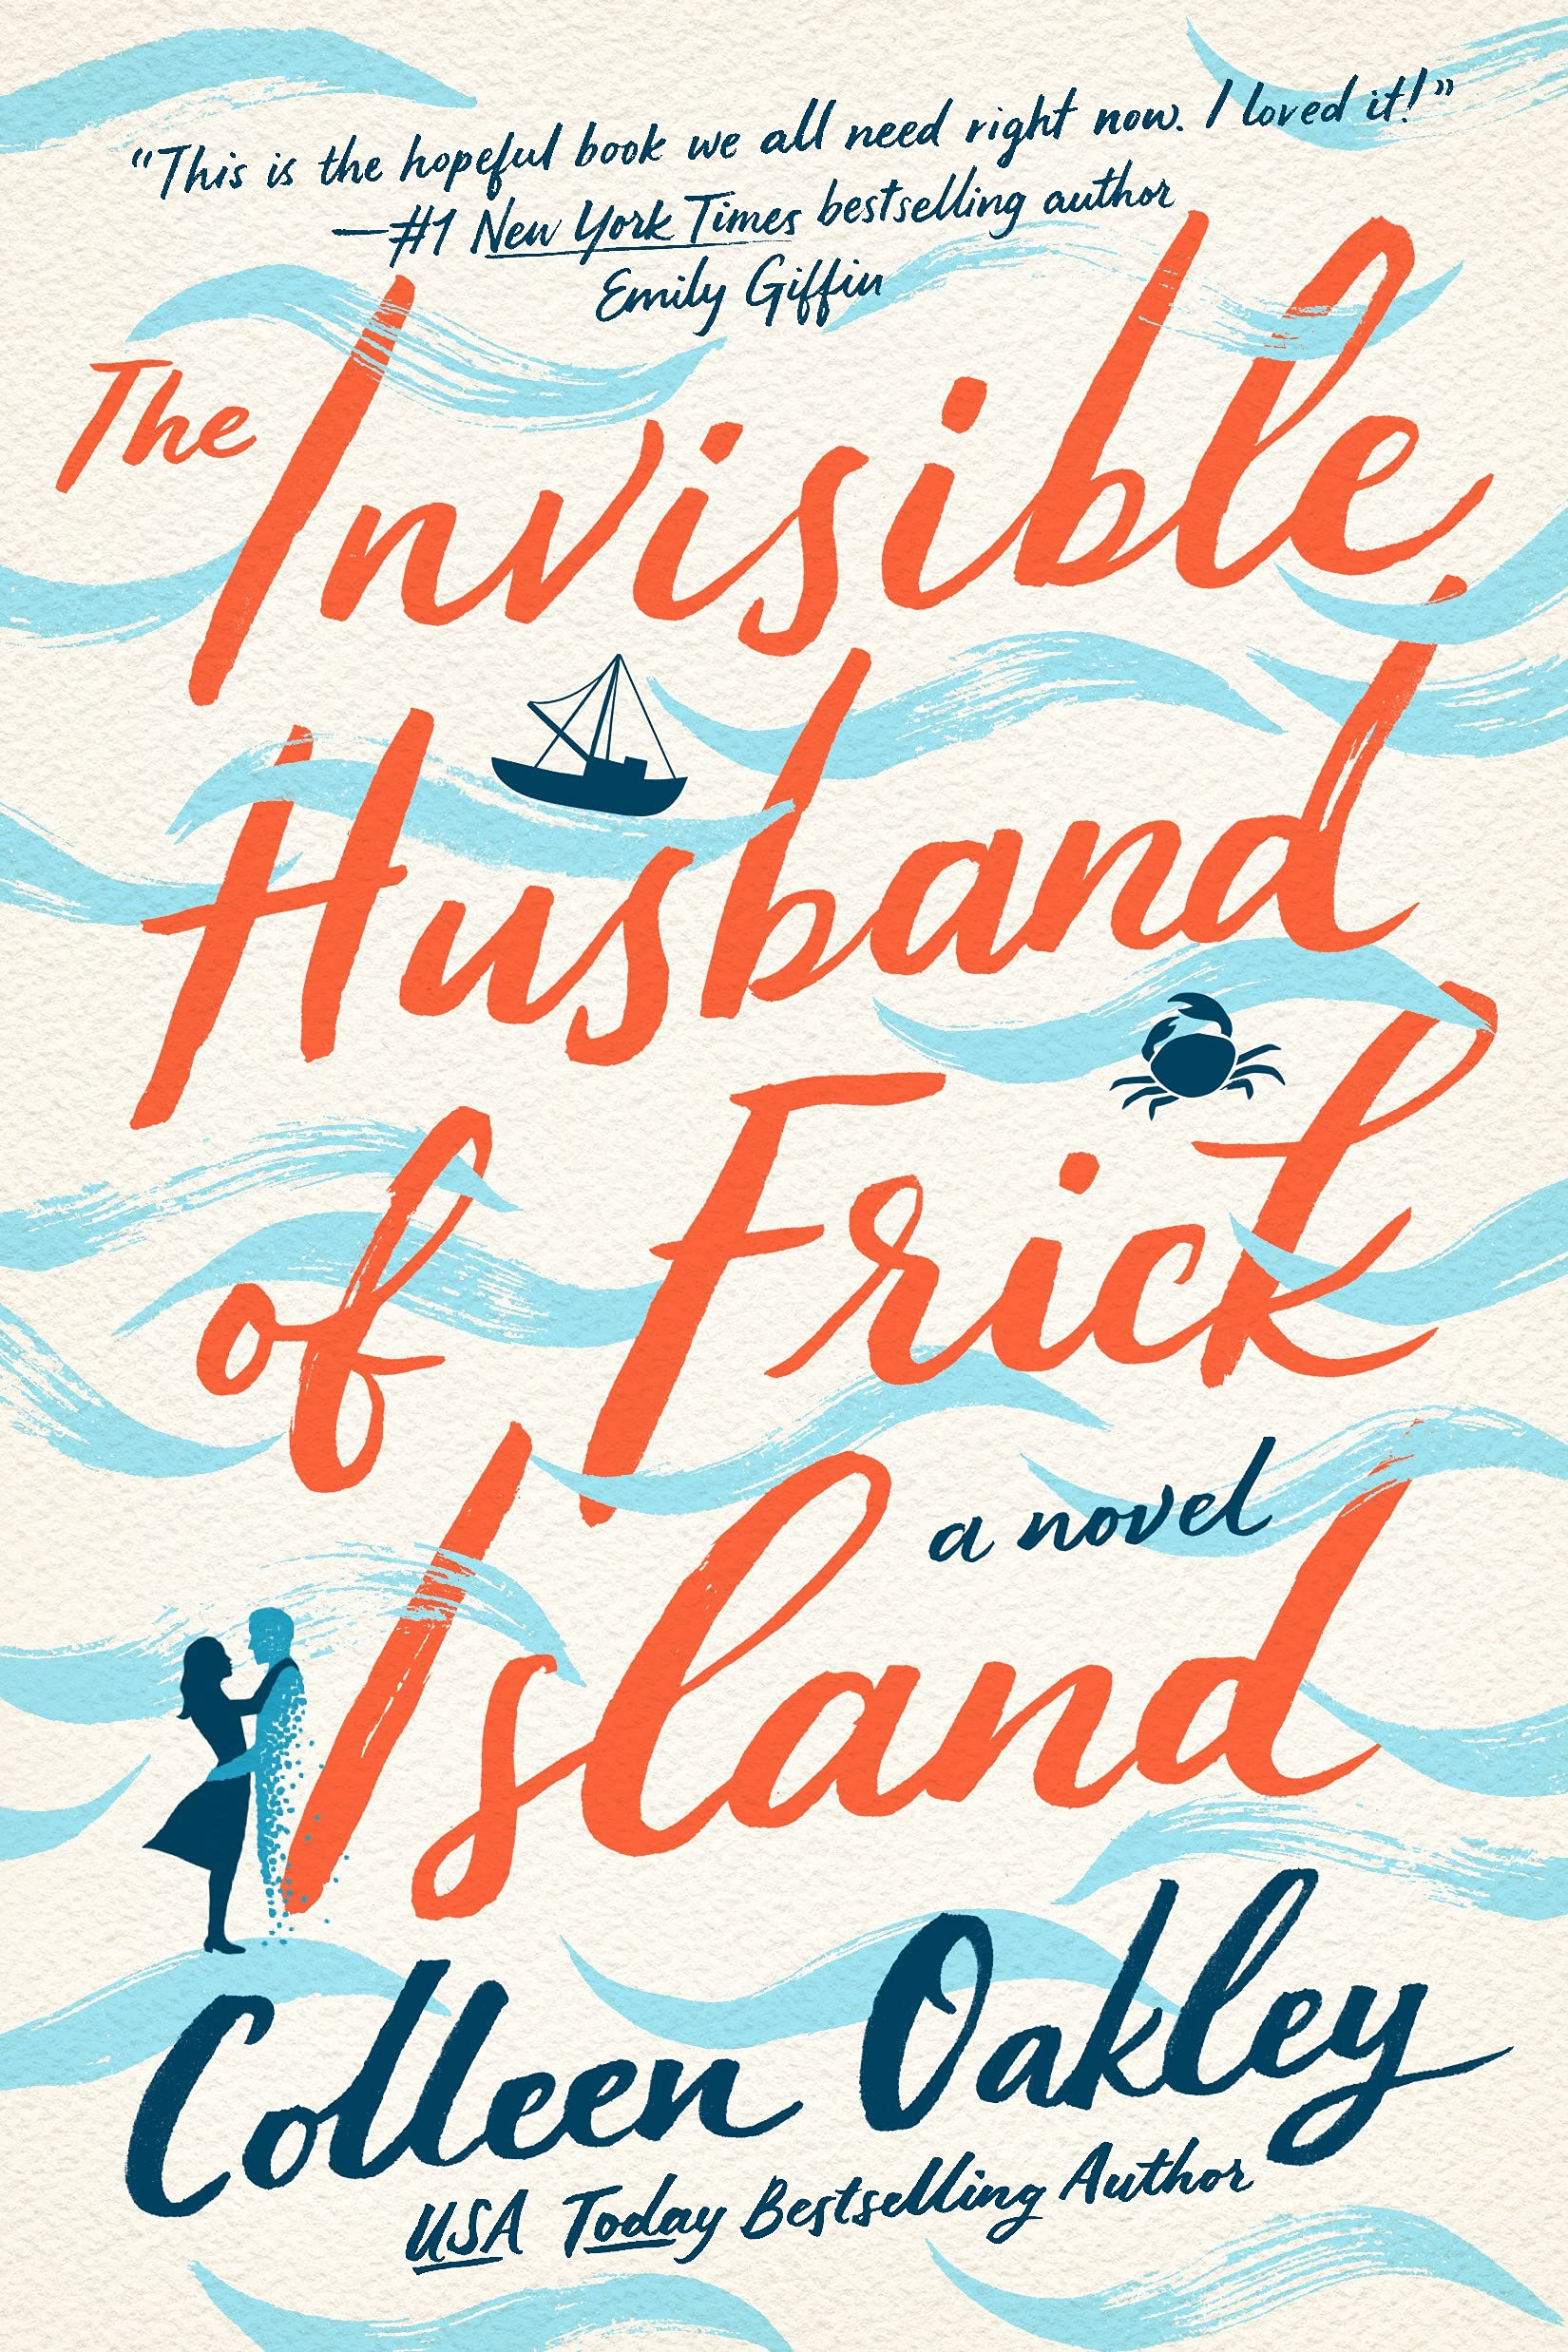 The Invisible Husband of Frick Island by Colleen Oakley.